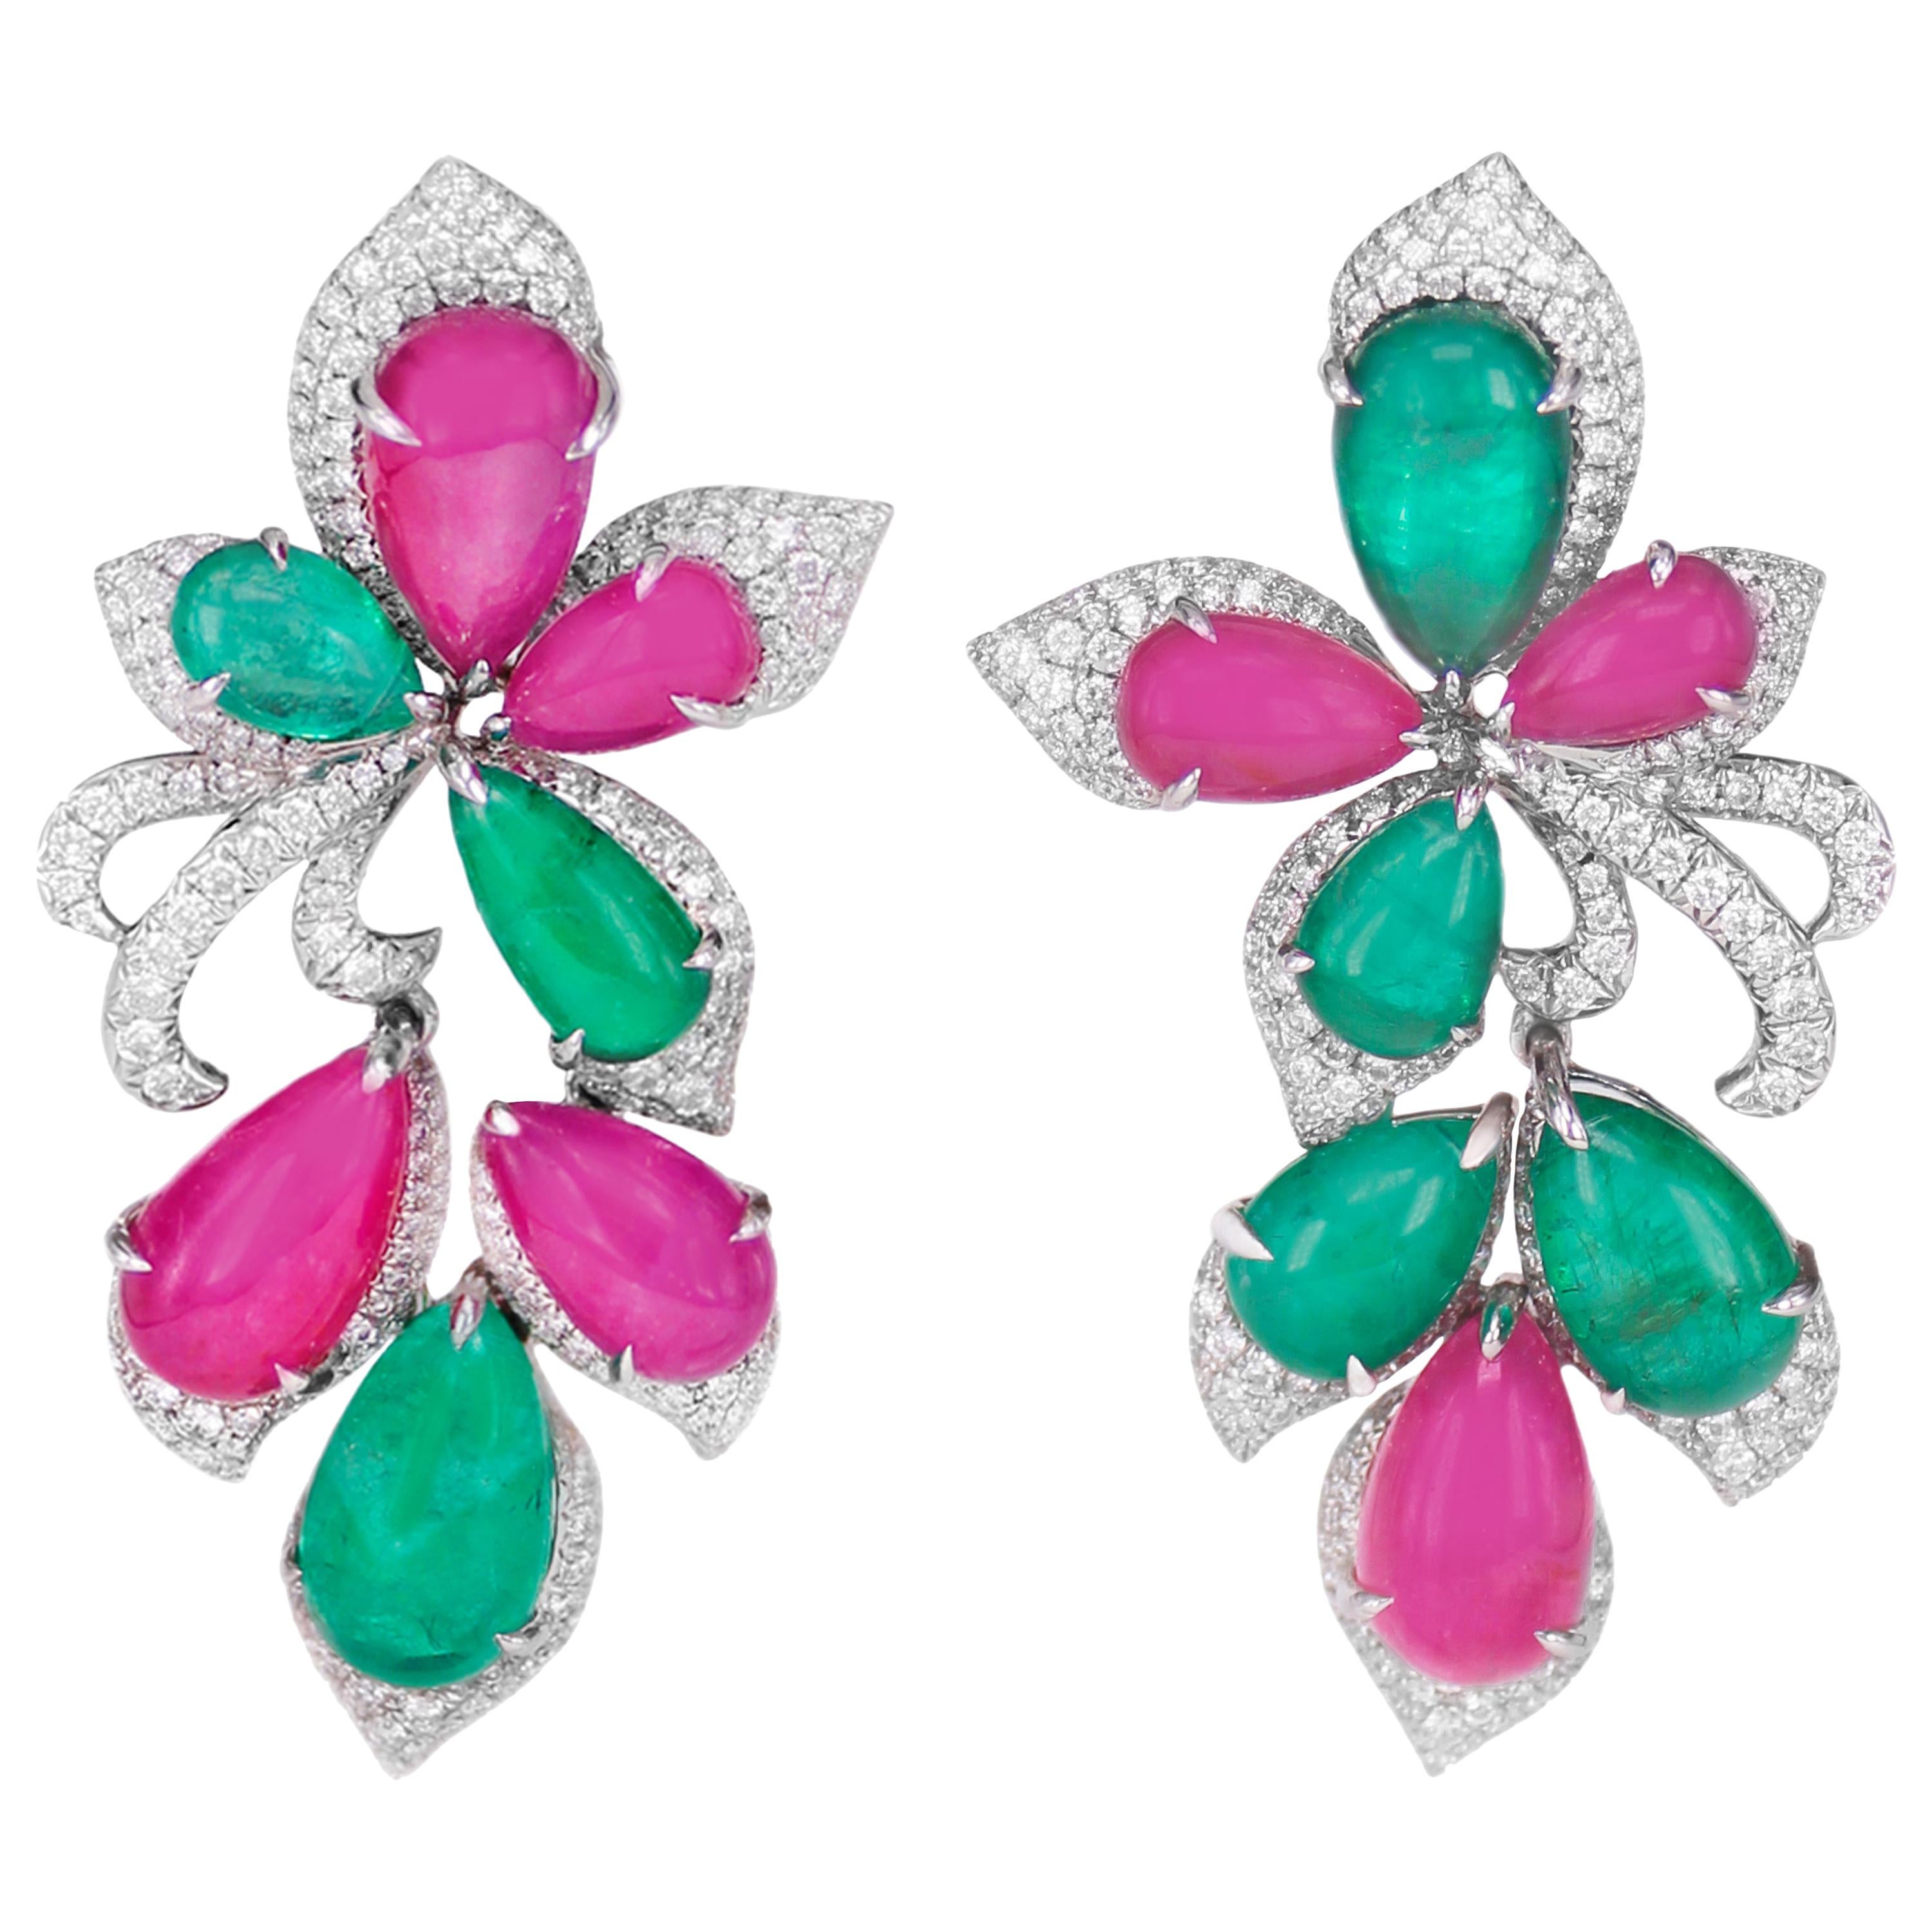 29 Carat Ruby and 17 Carat Emerald Chandelier Earring For Sale